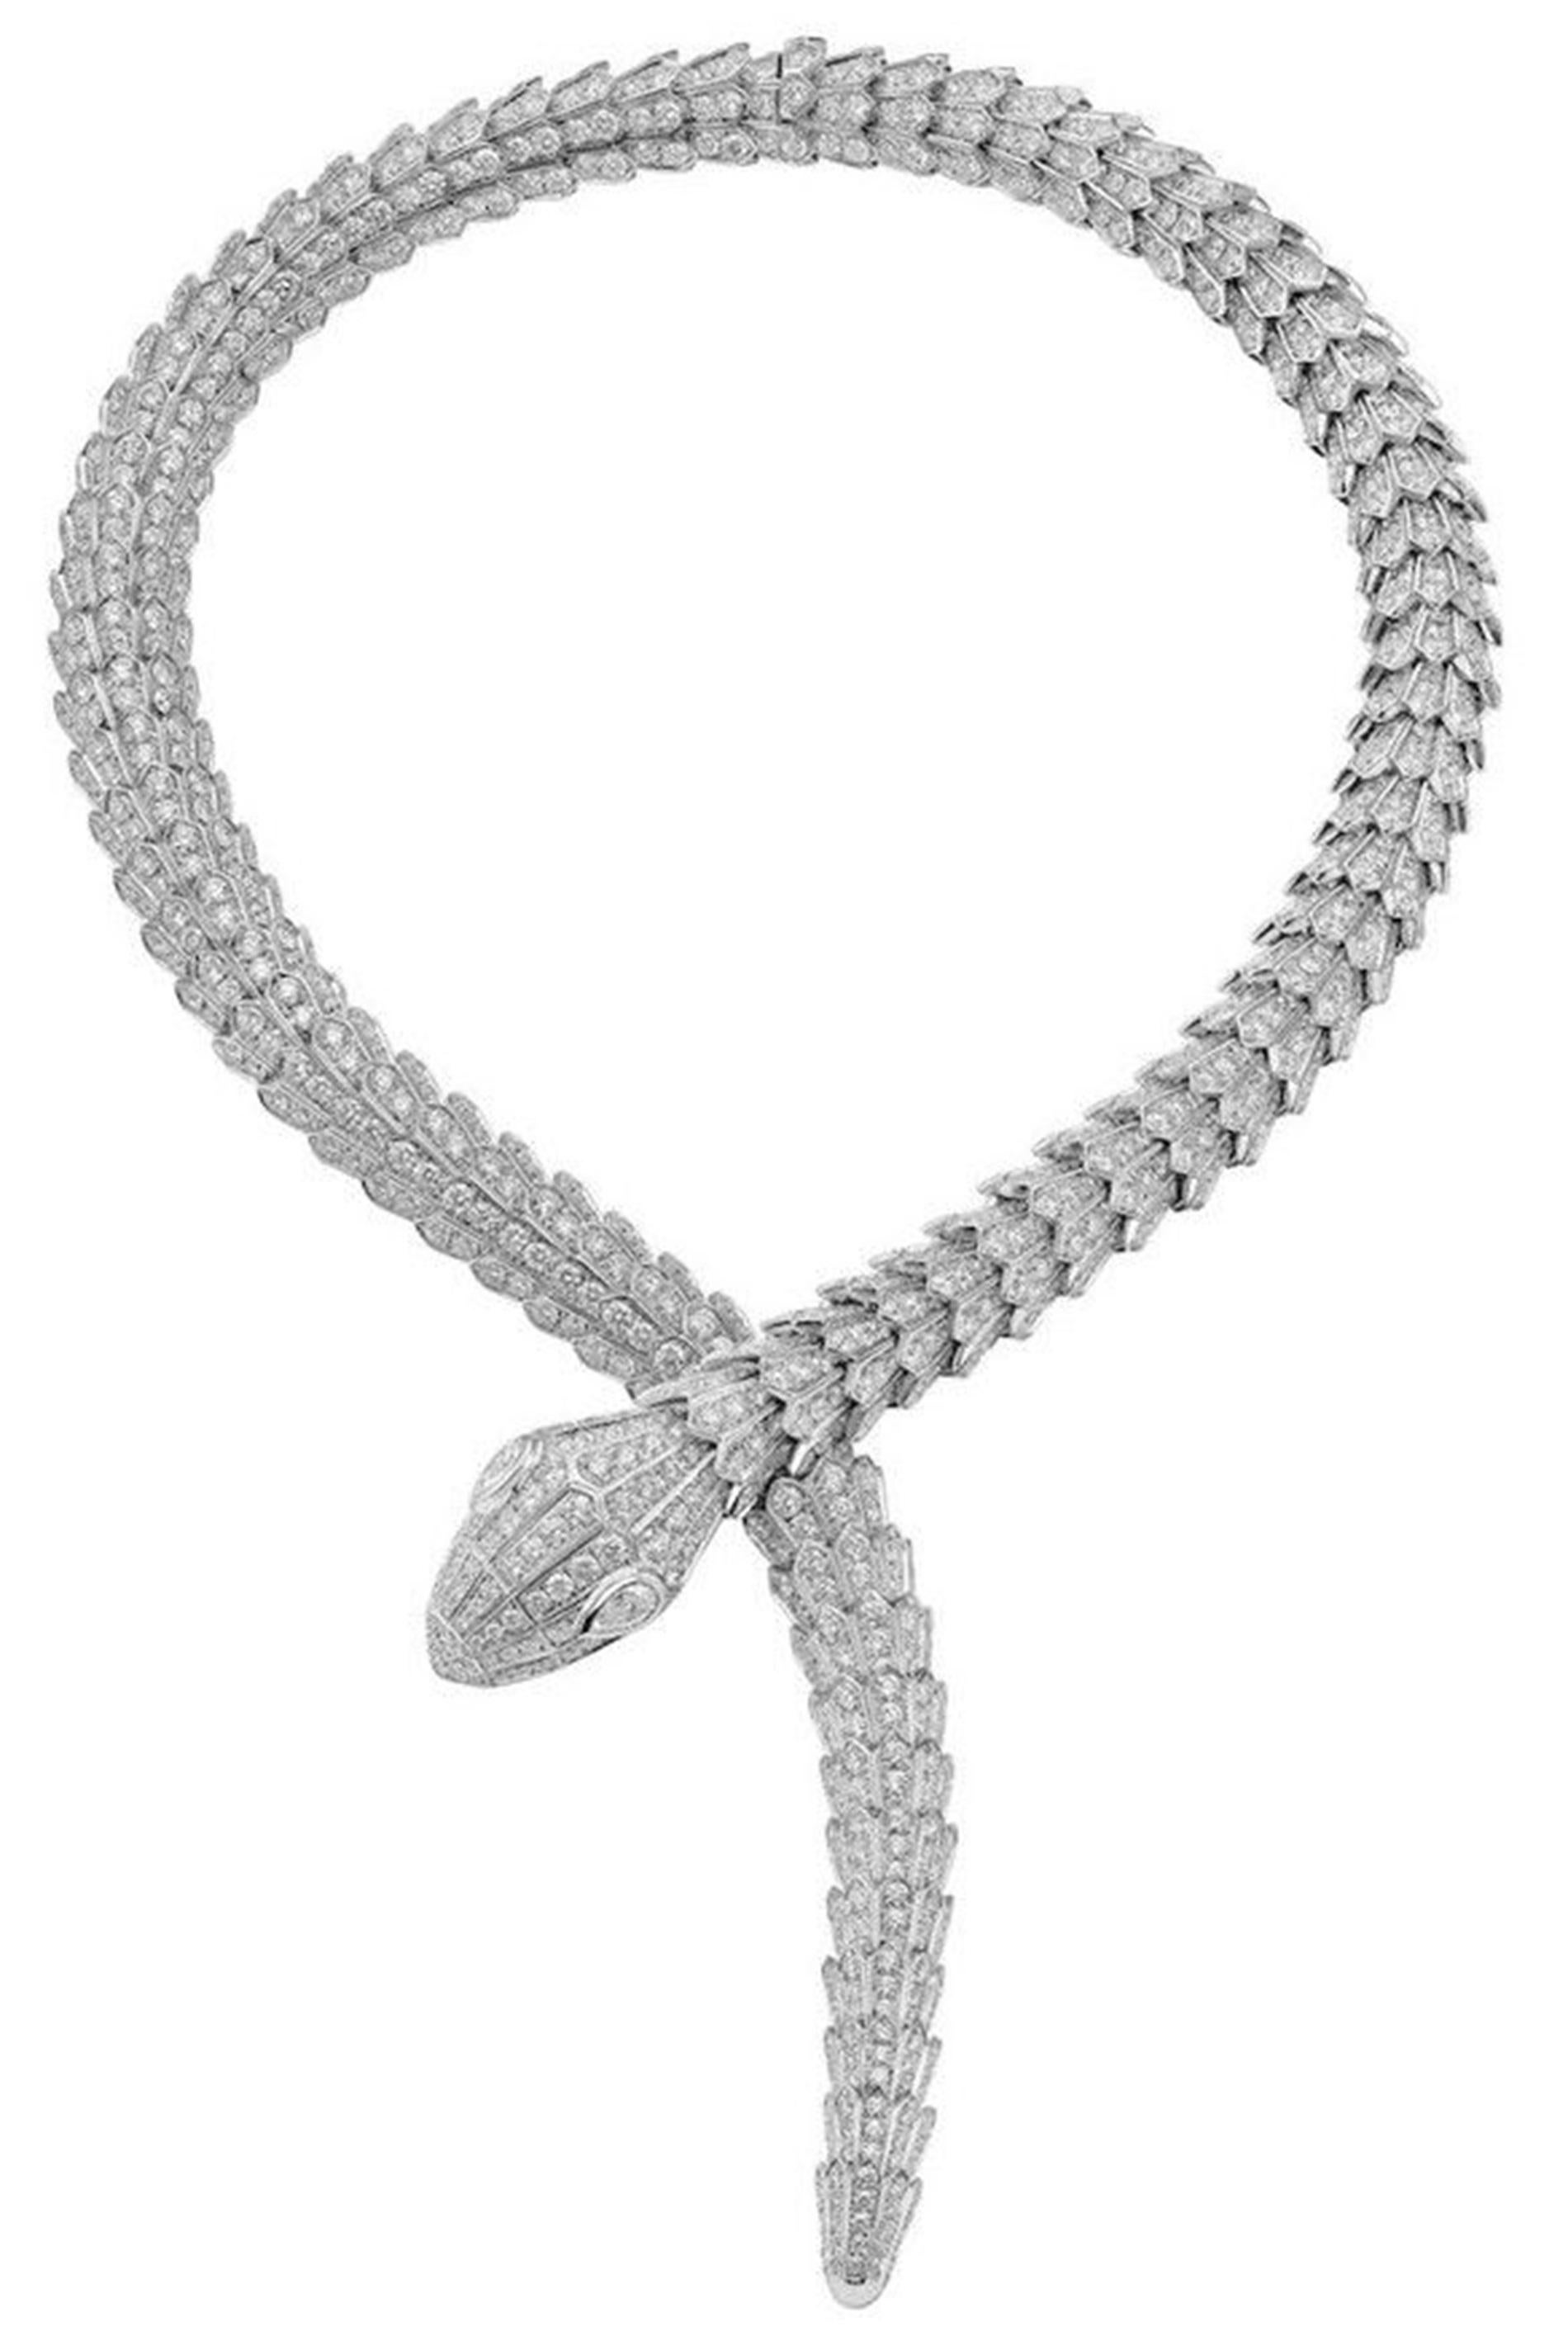 Step into the world of extraordinary craftsmanship and opulence with the Bvlgari Serpenti Diamond Wrap Necklace, a masterpiece curated in the renowned ateliers of Bvlgari in Italy. Every nuance of this necklace reflects meticulous artistry, bathed